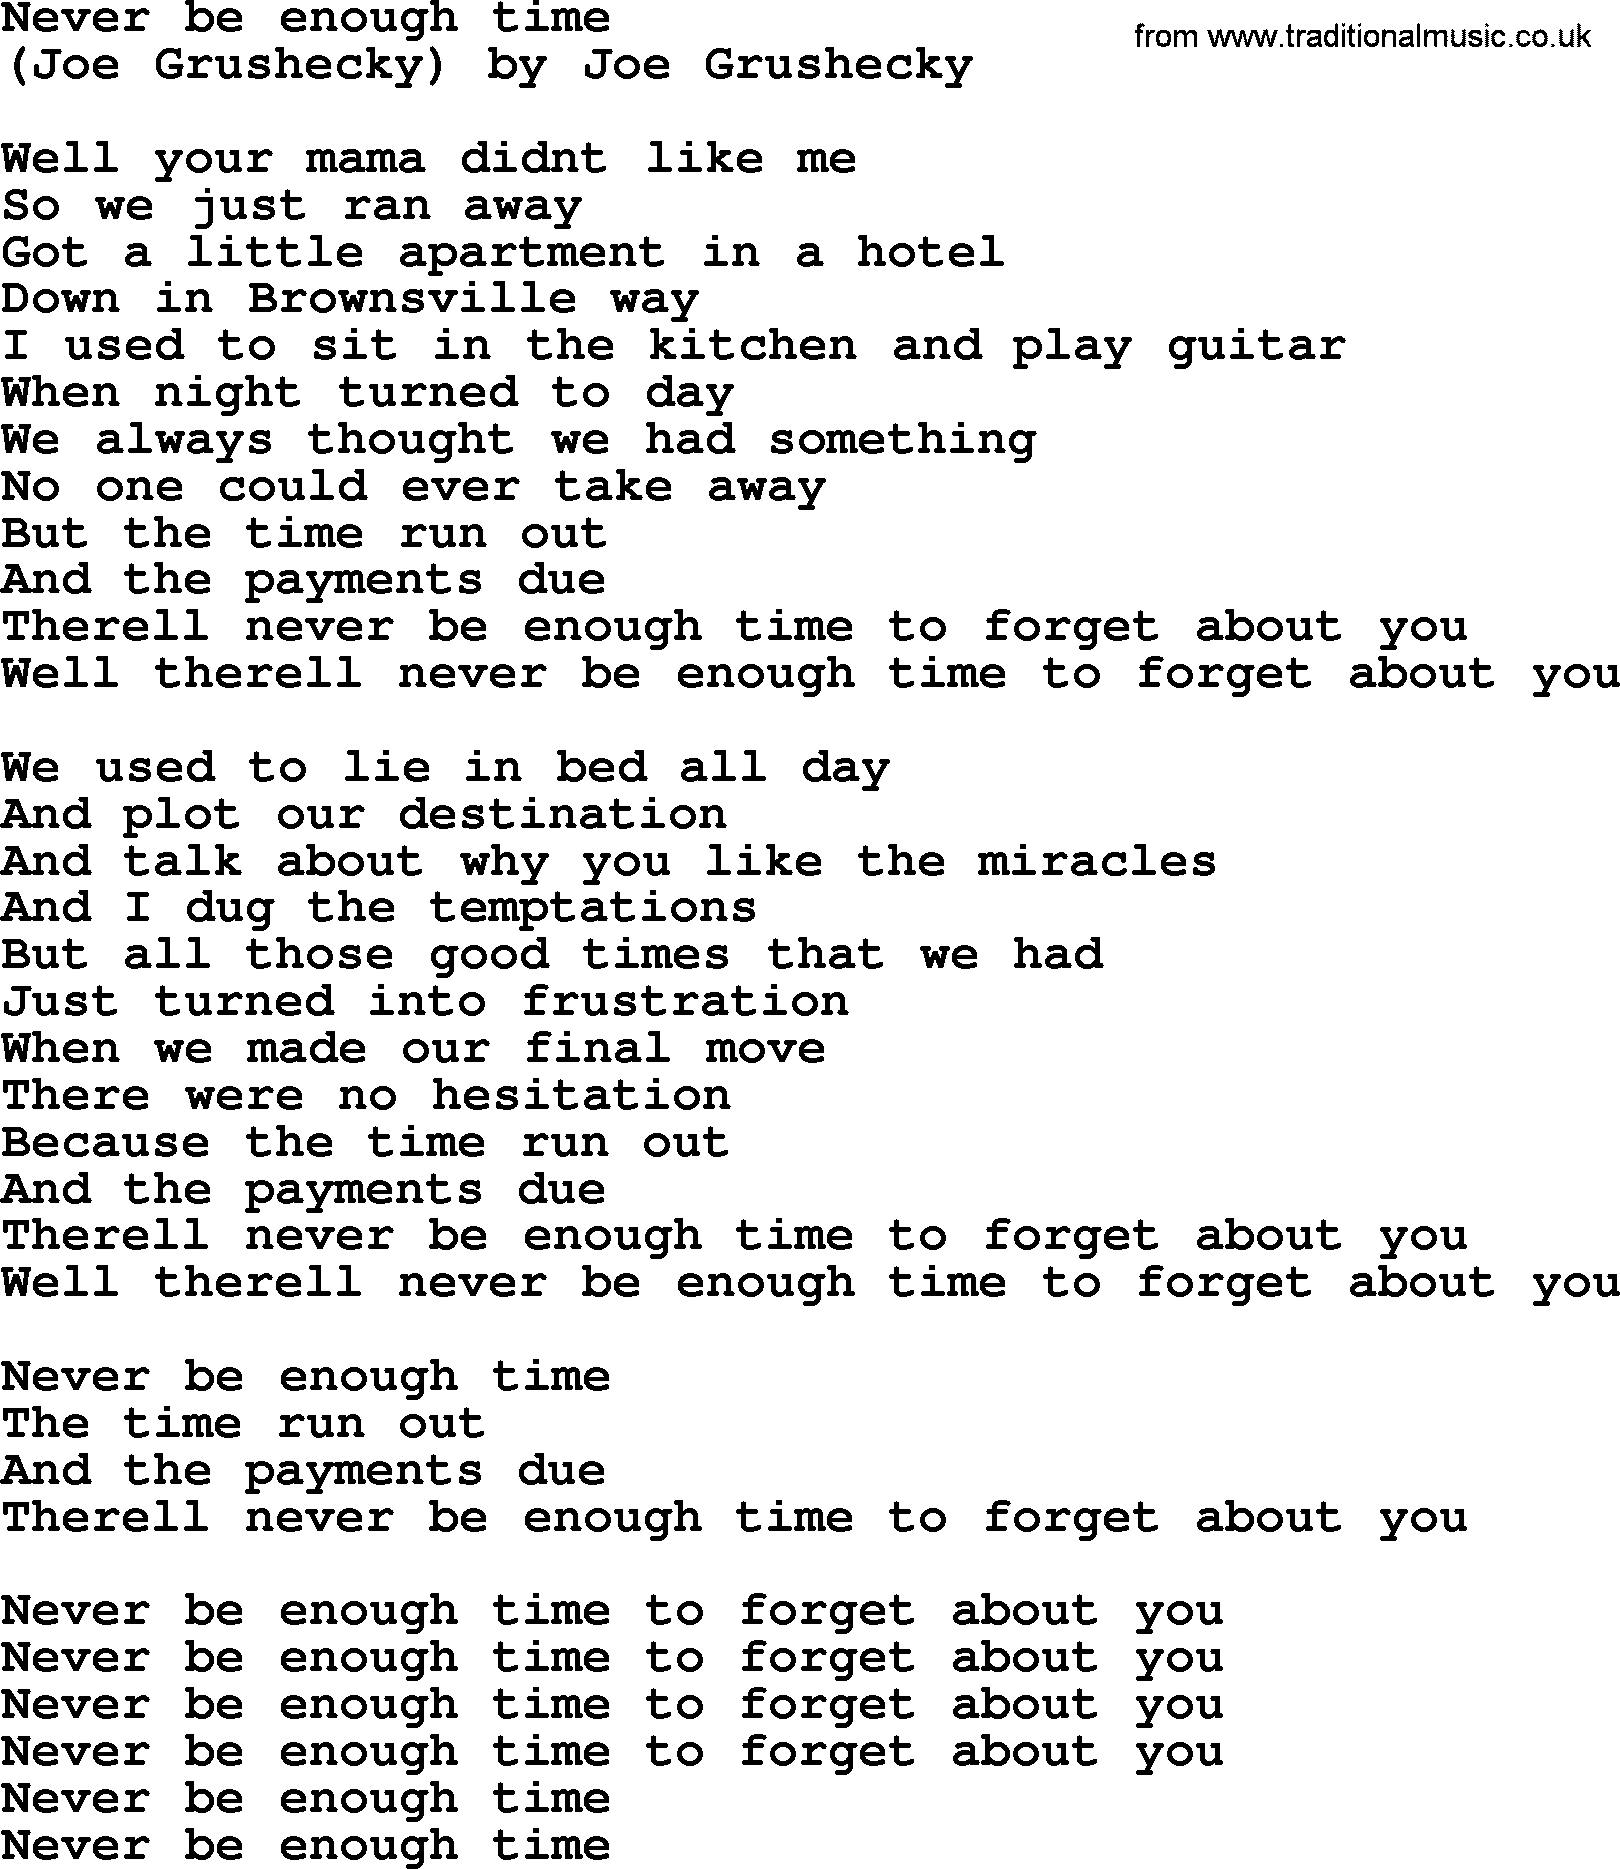 Bruce Springsteen song: Never Be Enough Time lyrics